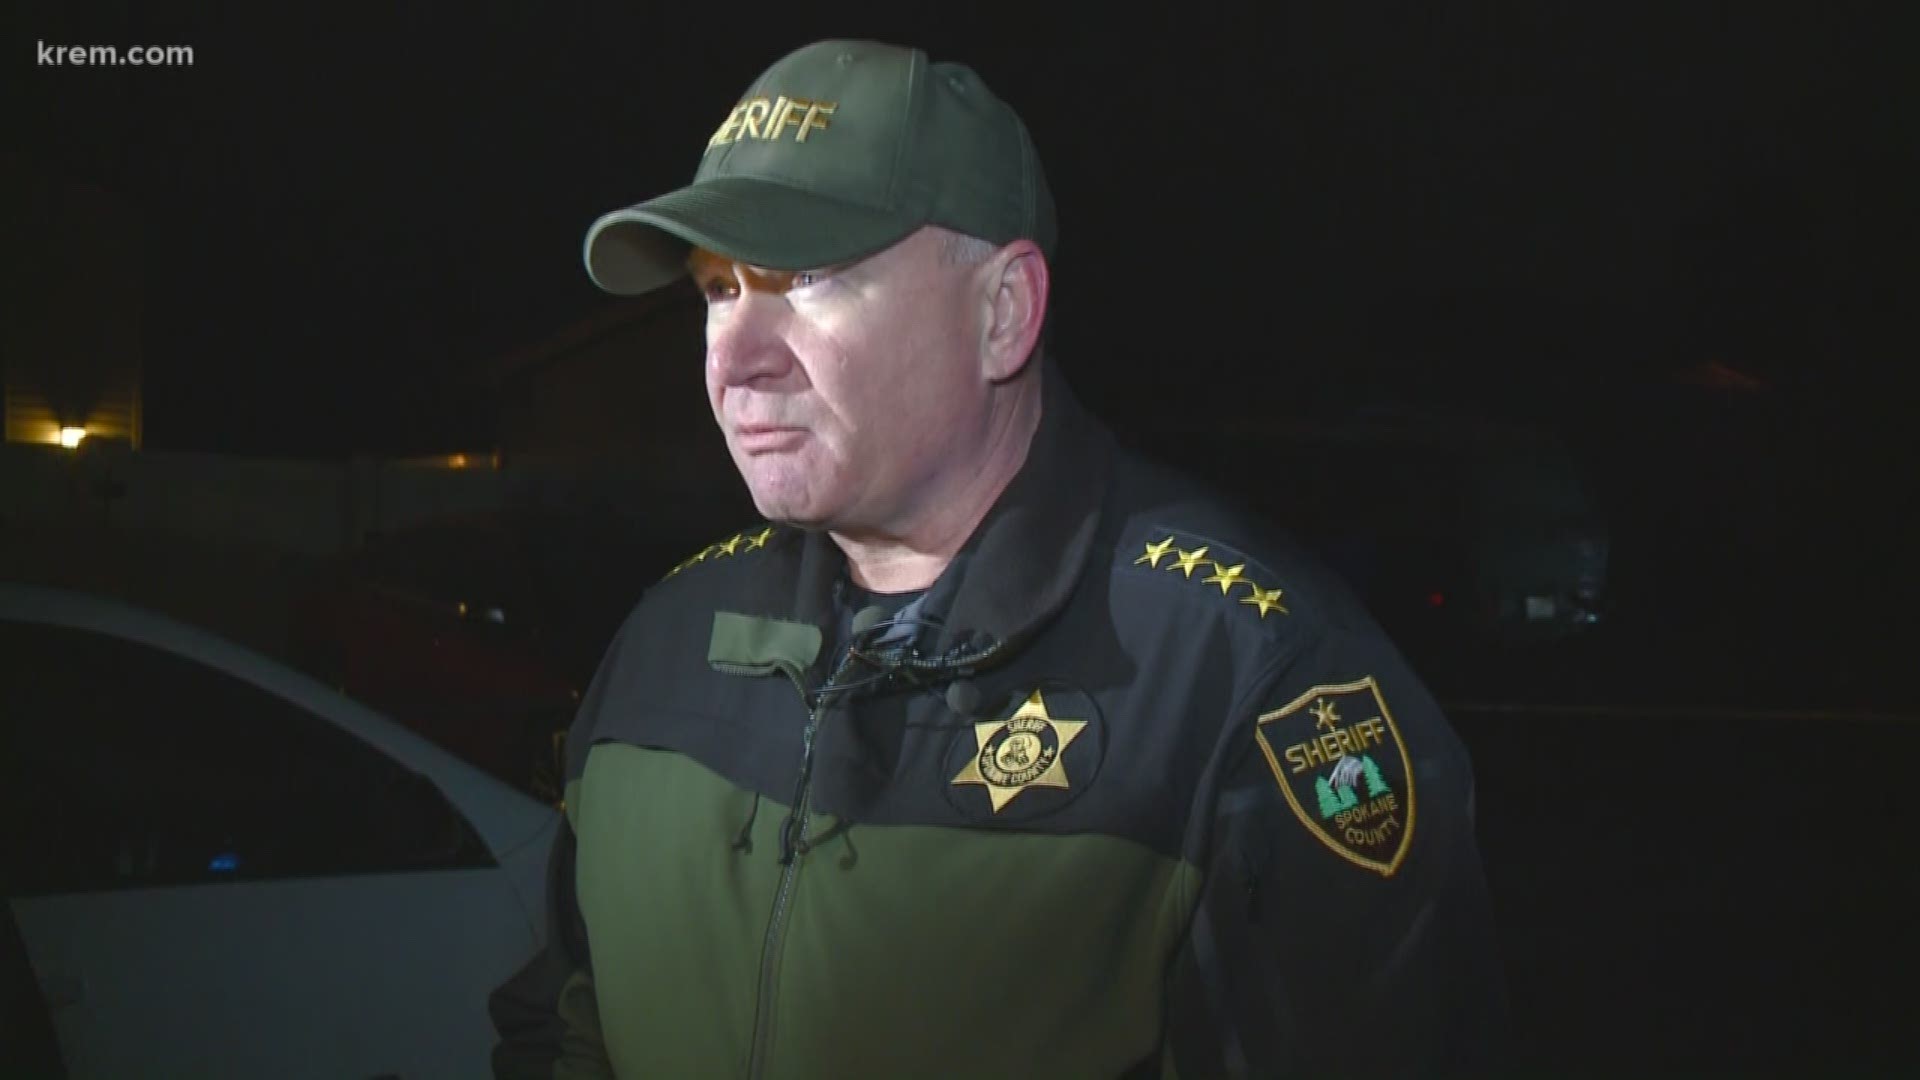 Spokane Co. Sheriff Ozzie Knezovich said the suspect walked toward the deputy several times and refused to stop, adding that the deputy's Taser failed.